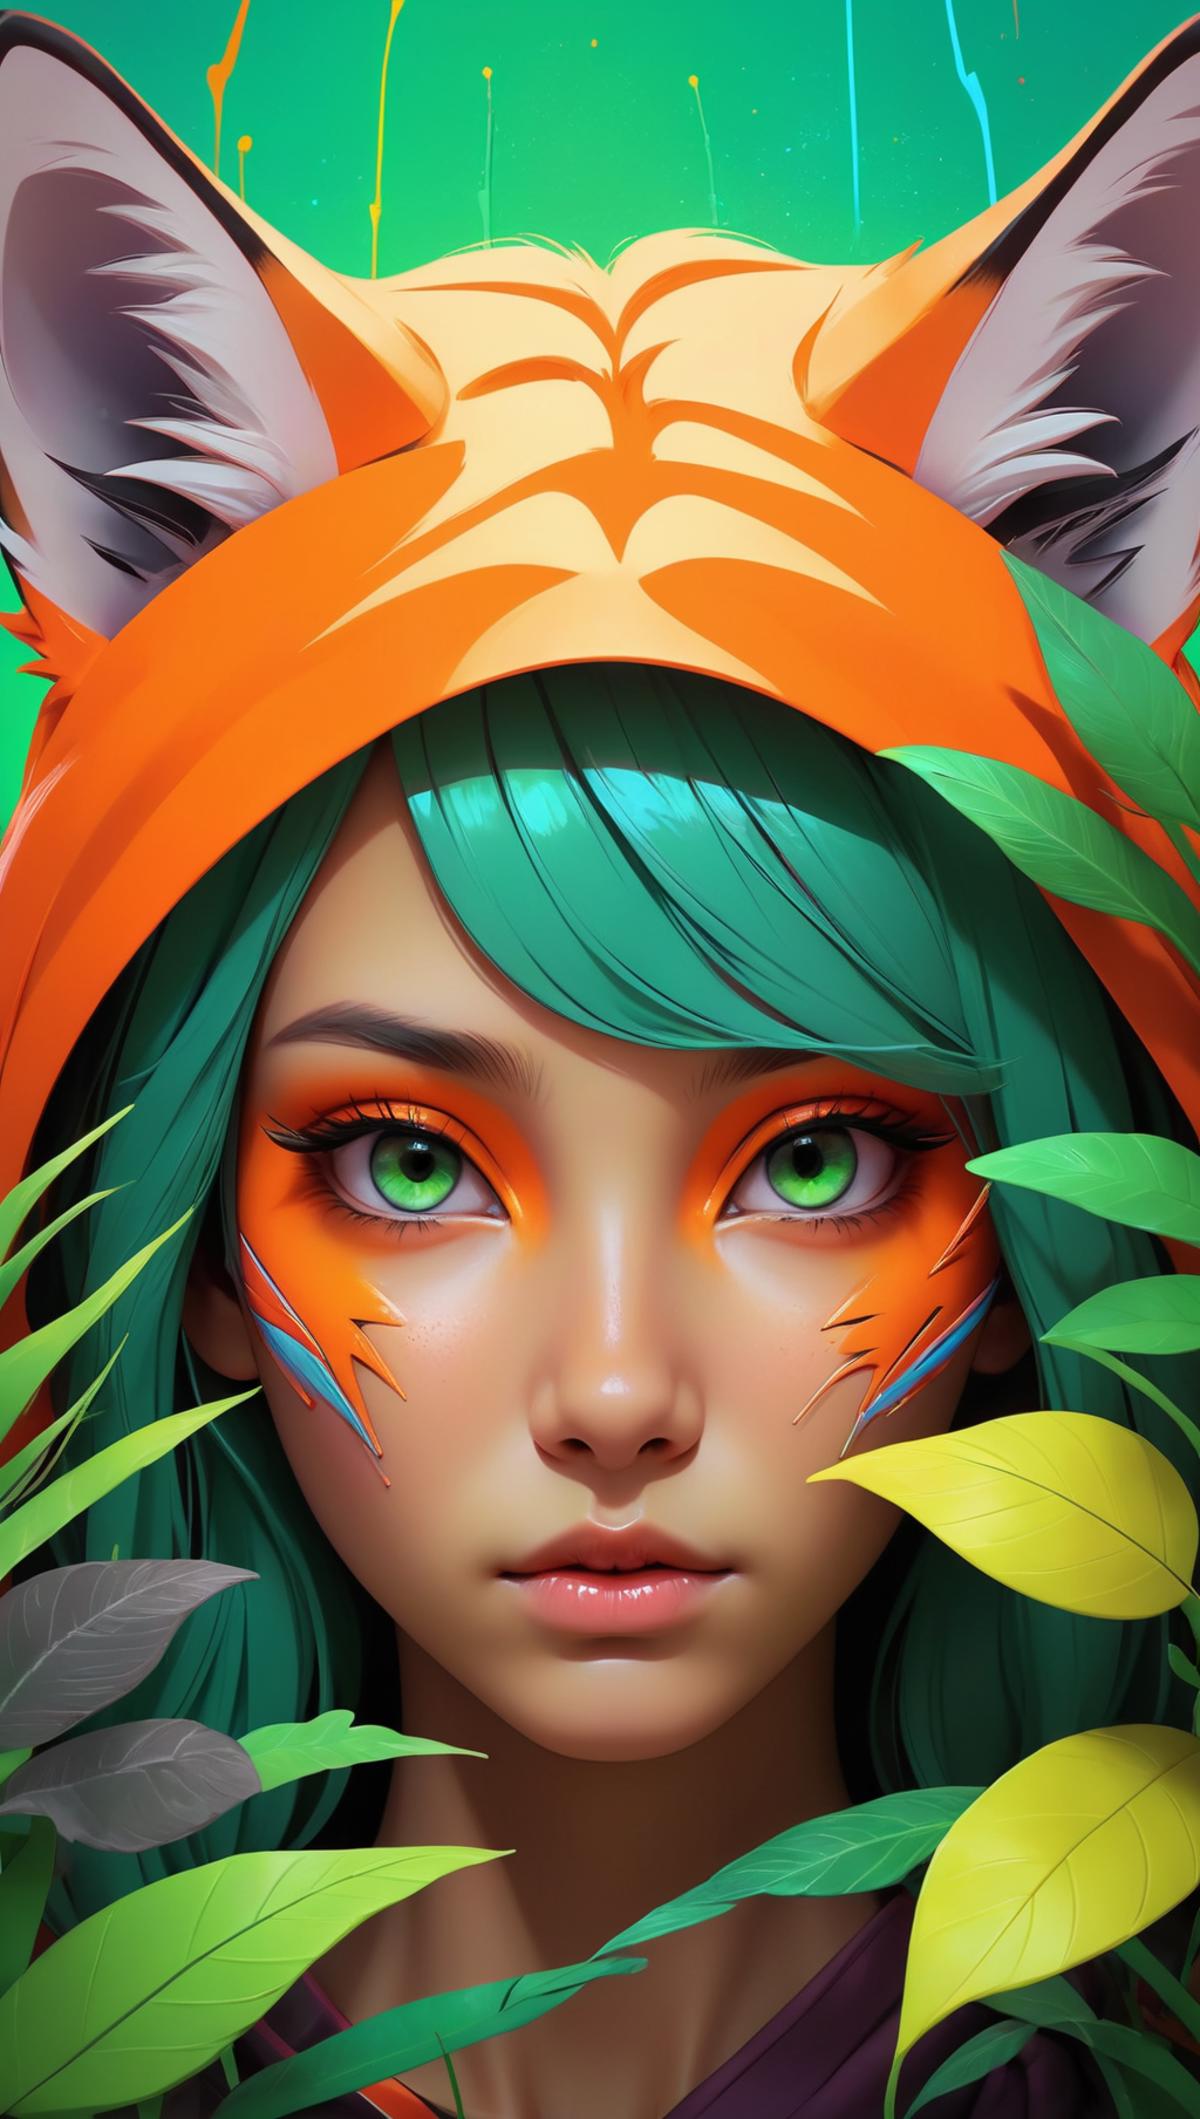 Face paint of a woman with green eyes and orange accents.